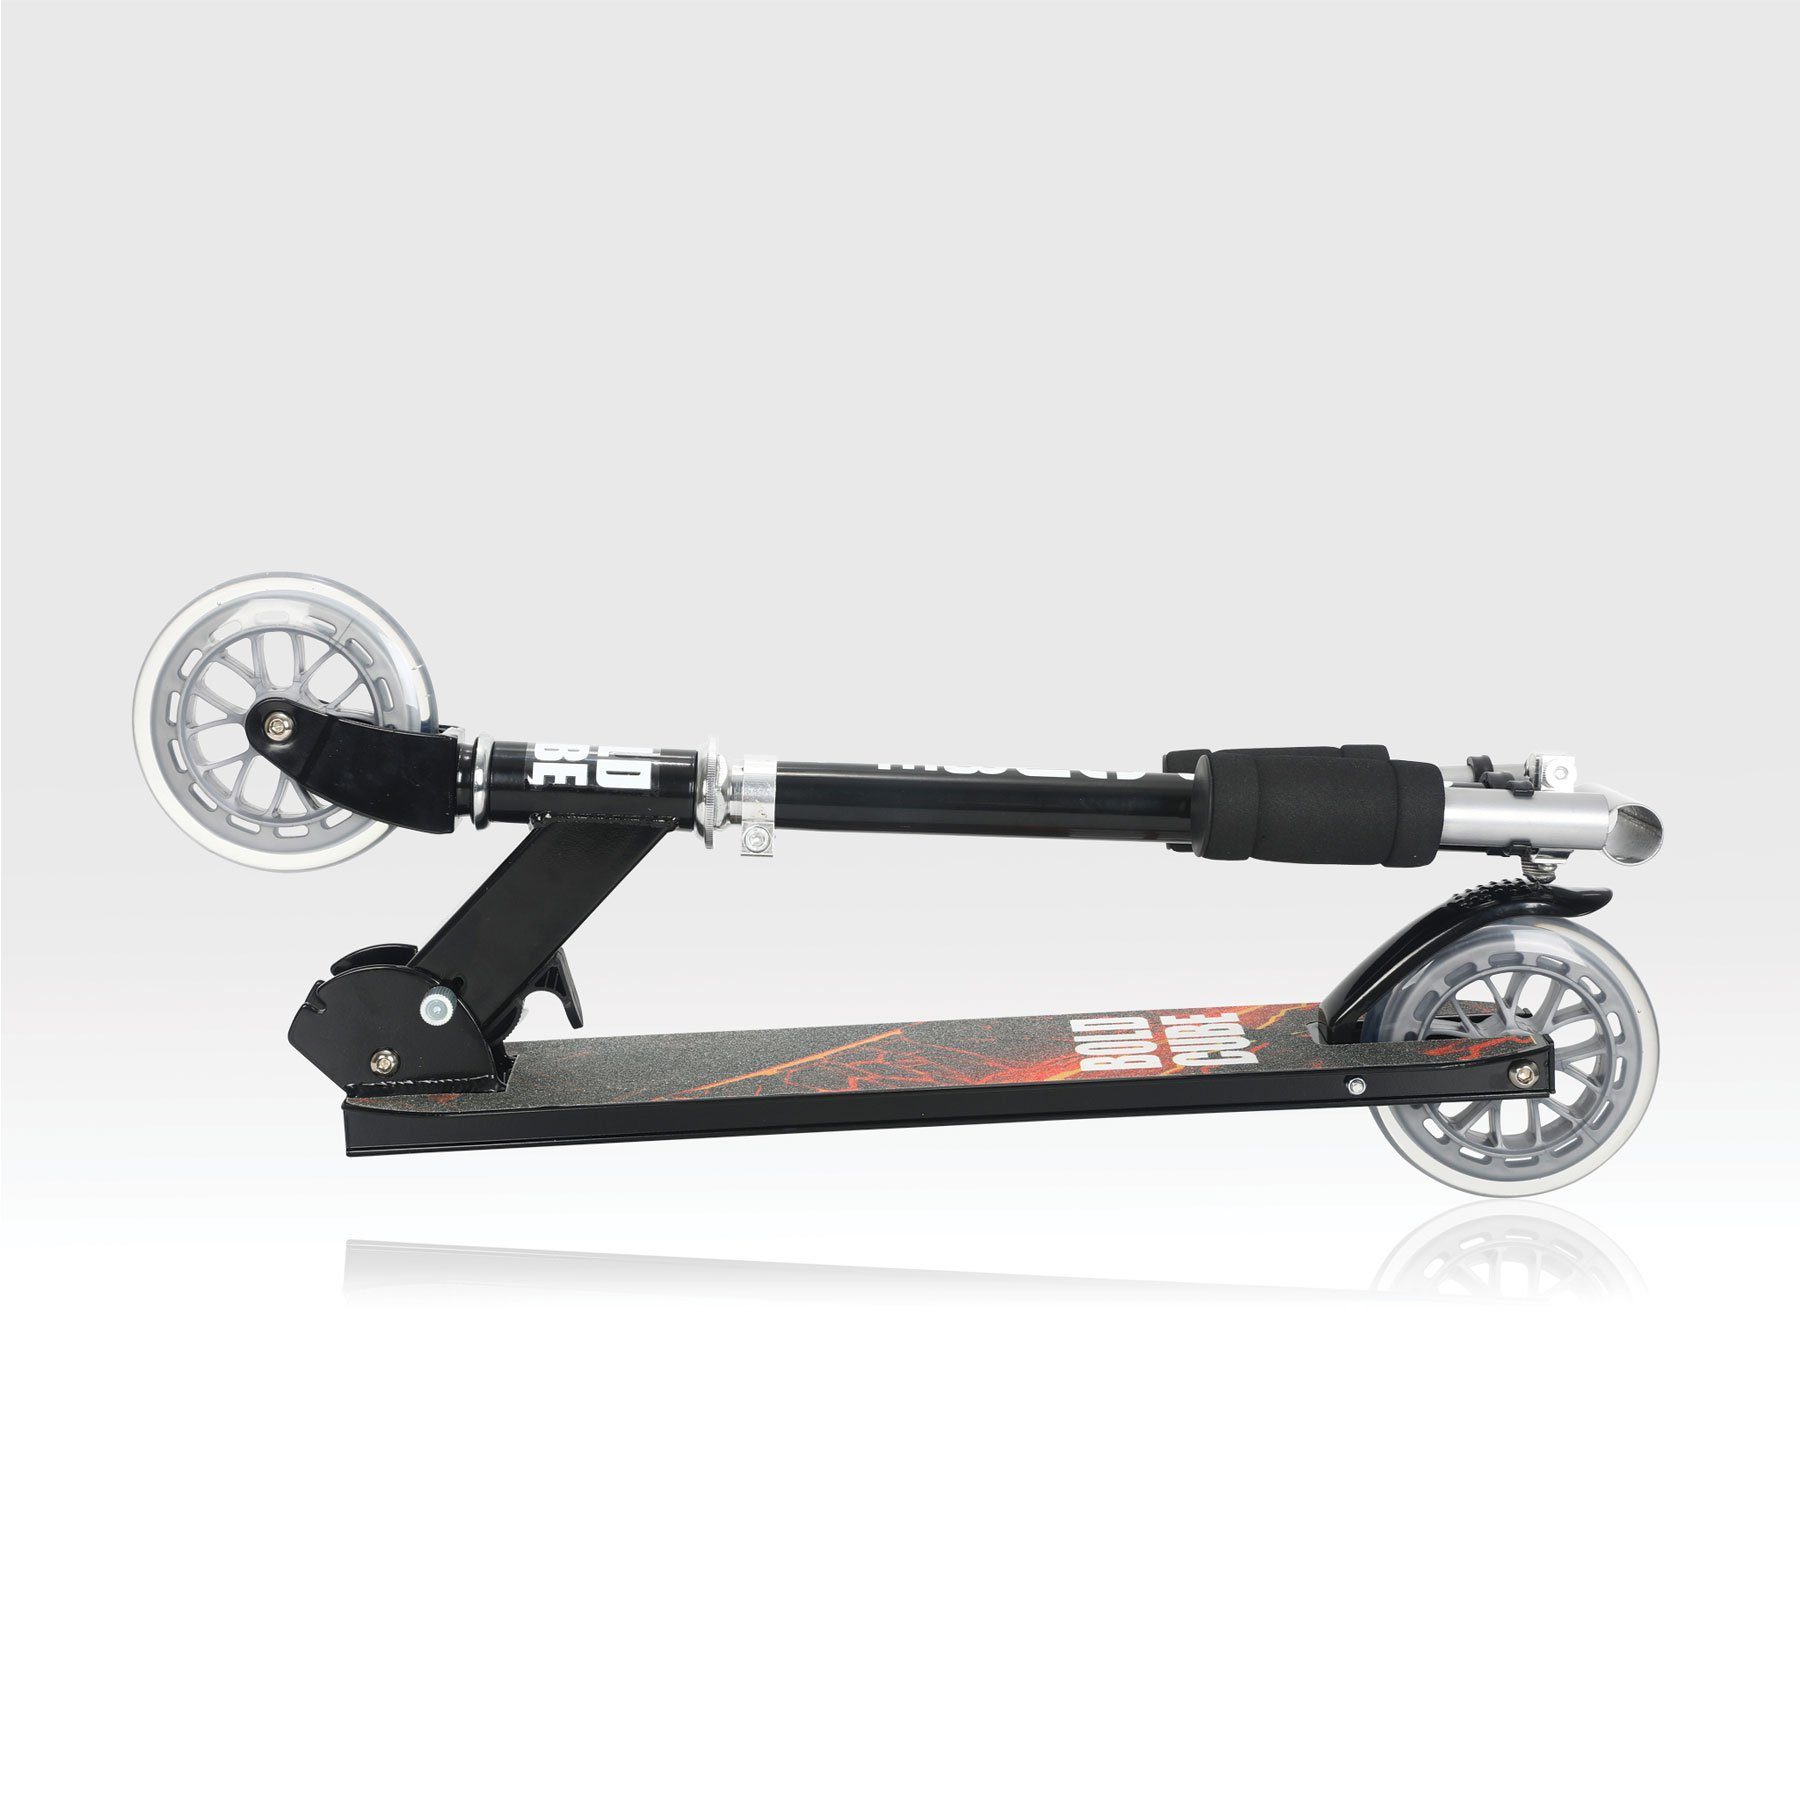 Scooter 2-Rad Scooter BOLDCUBE Black